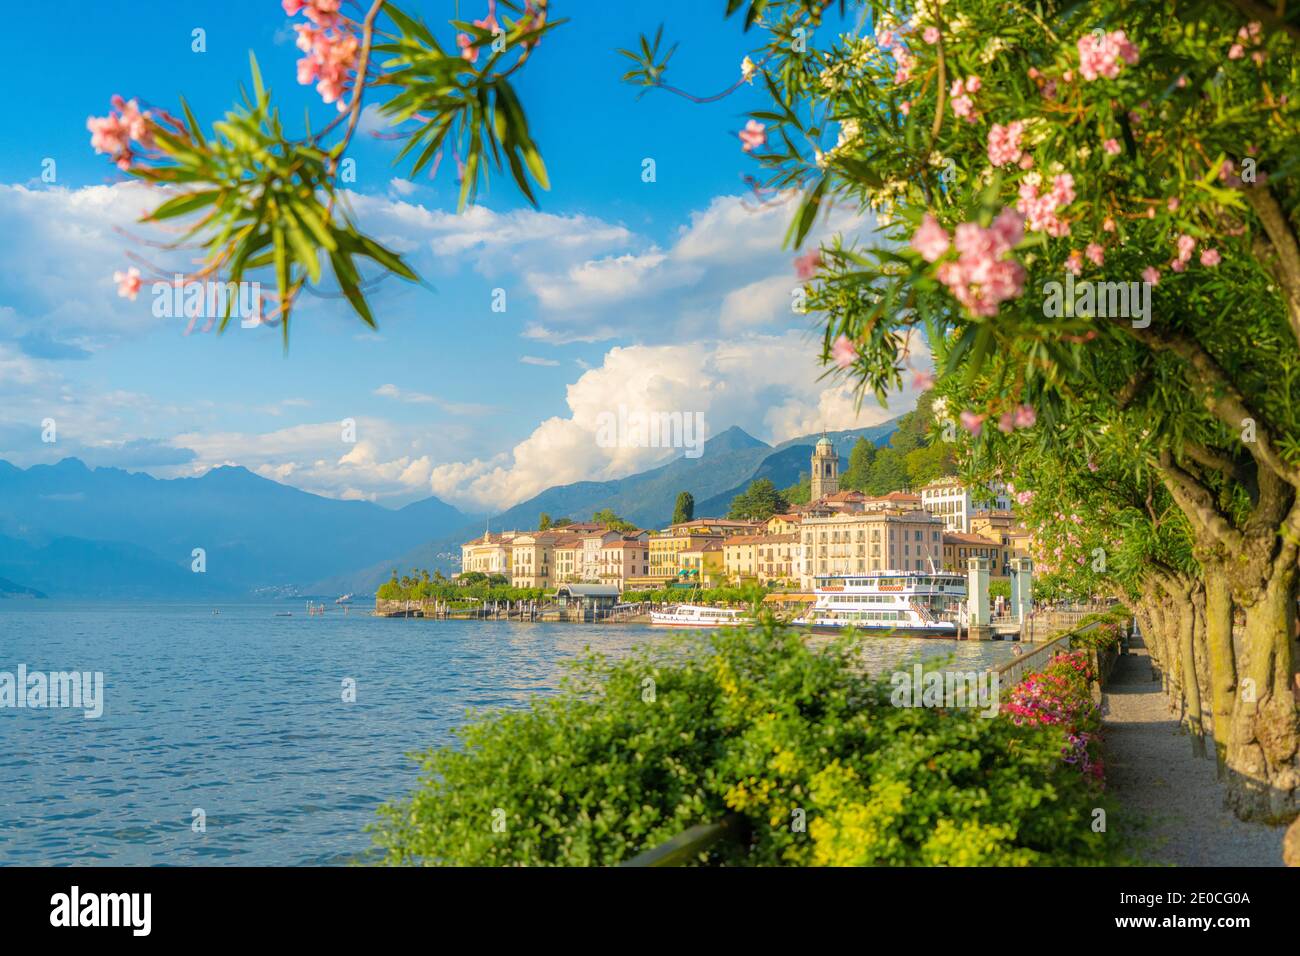 Bellagio and mountains seen from lakefront full of flowering plants, Lake Como, Como province, Lombardy, Italian Lakes, Italy, Europe Stock Photo